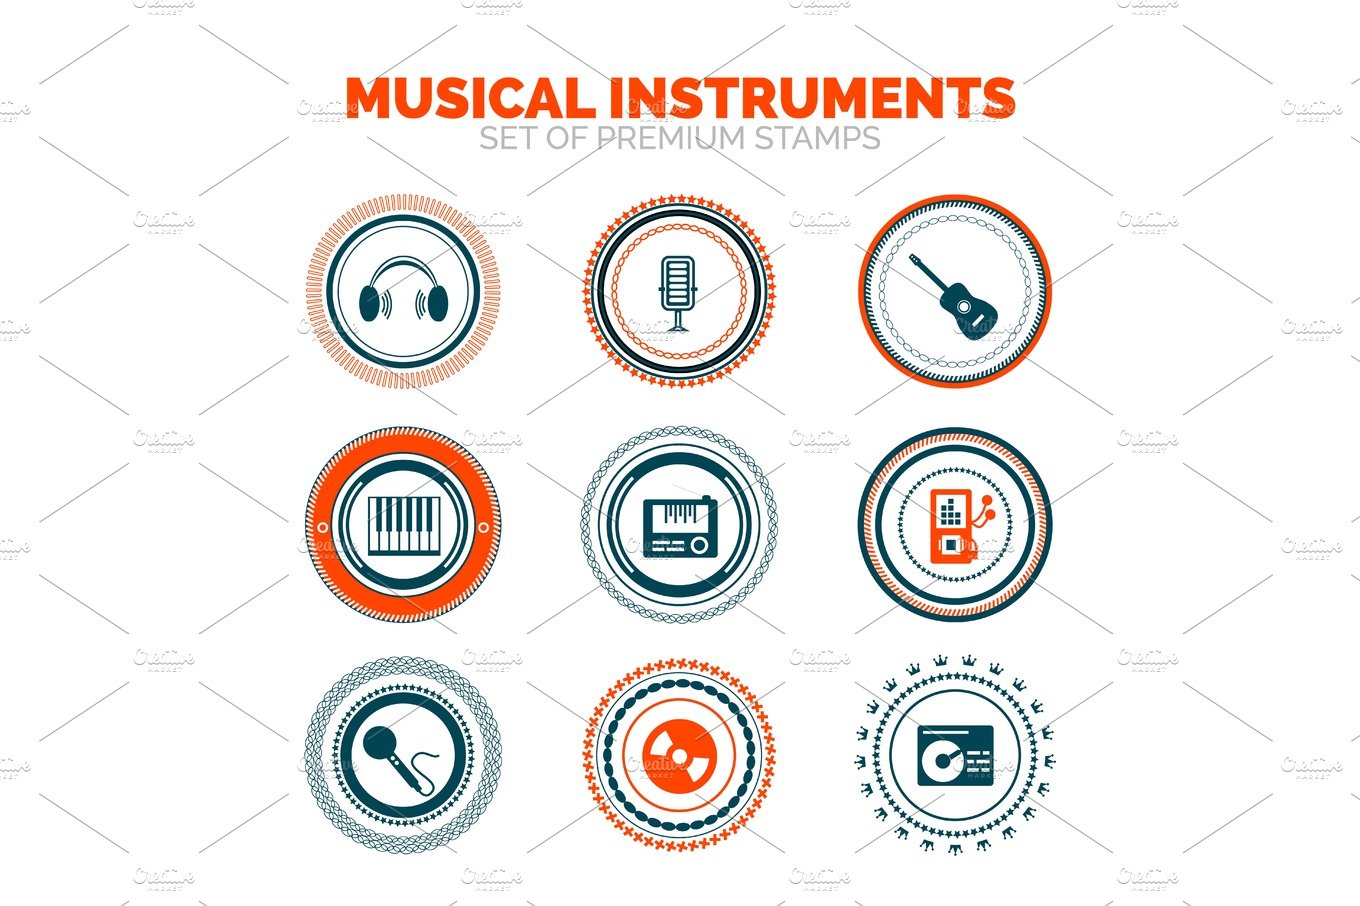 Set of musical instruments vector premium stamps cover image.